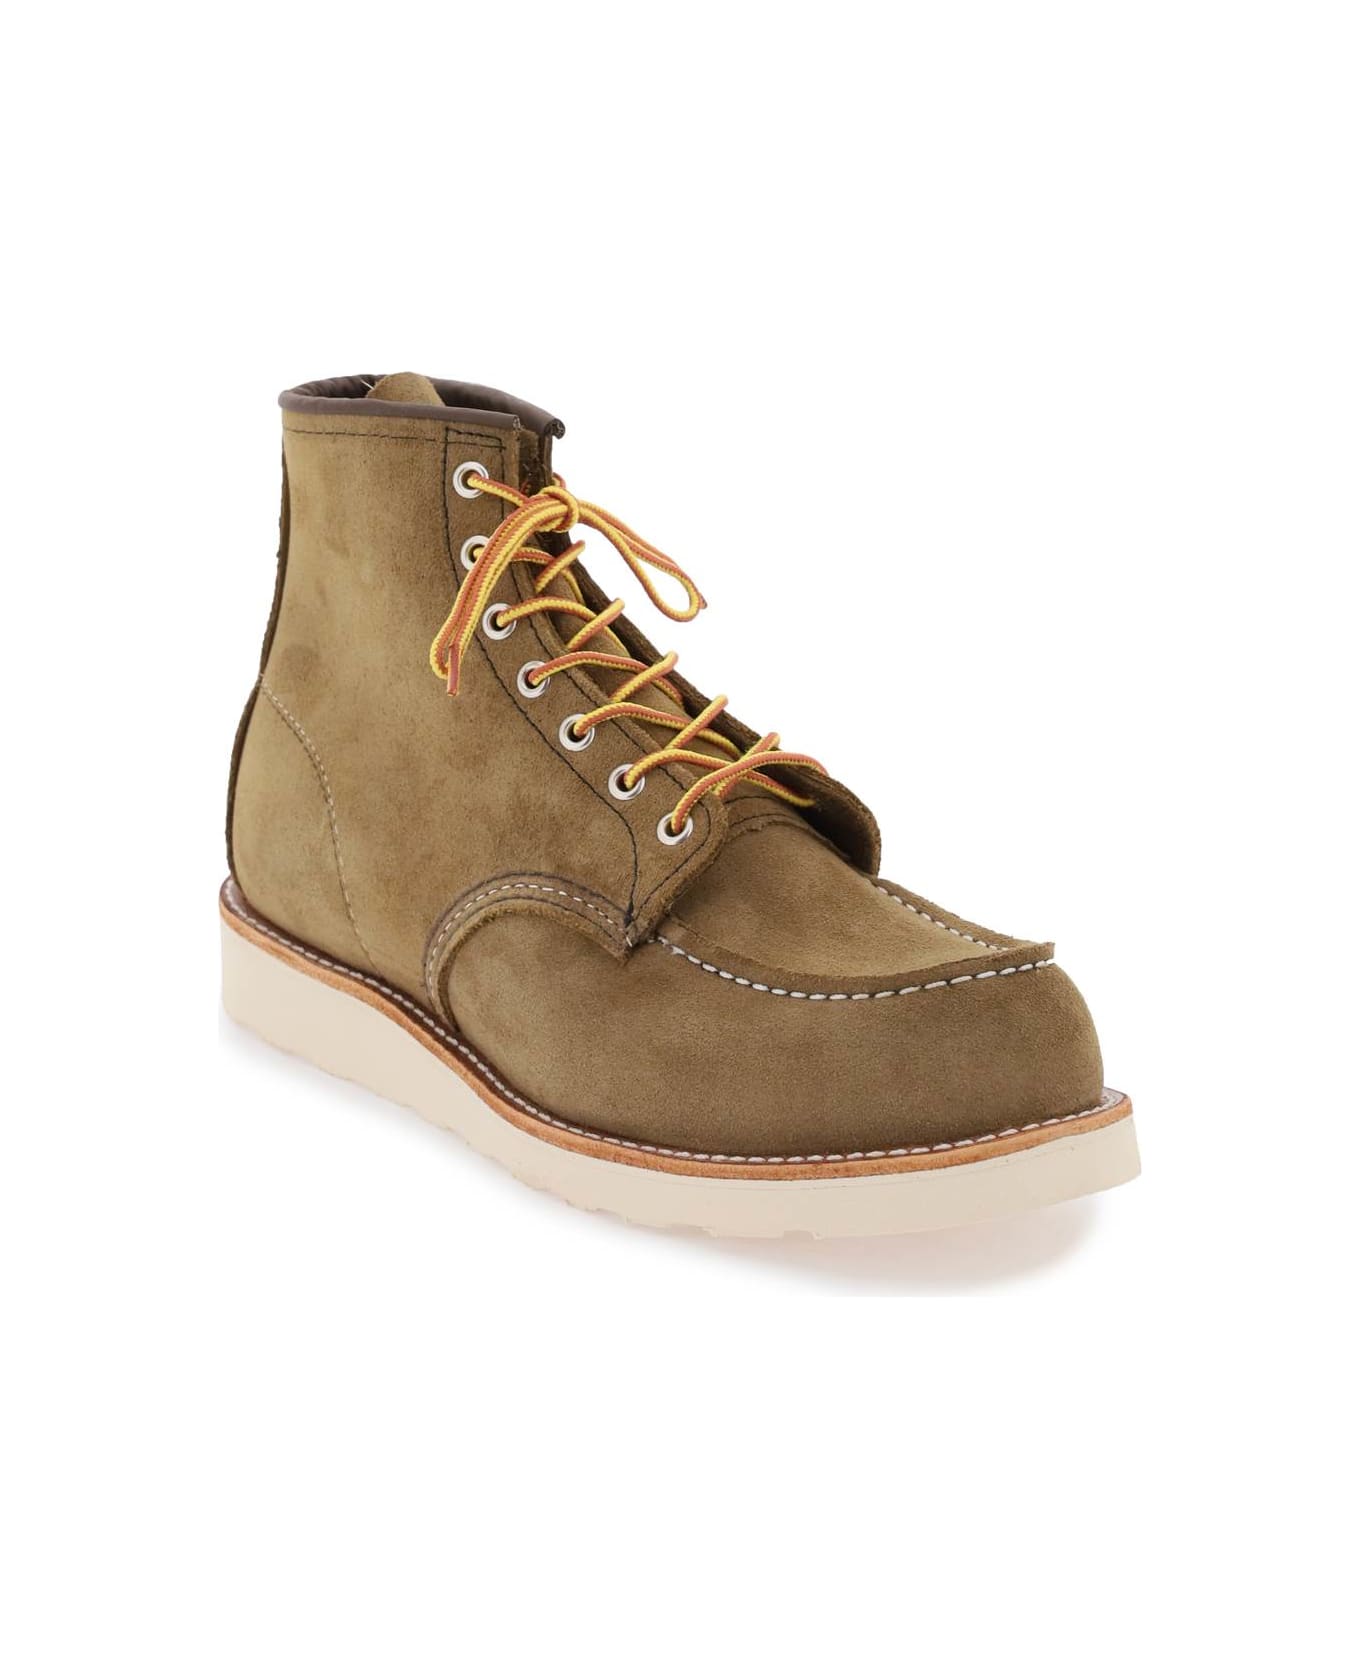 Red Wing Classic Moc Ankle Boots - OLIVE MOHAVE (Khaki)